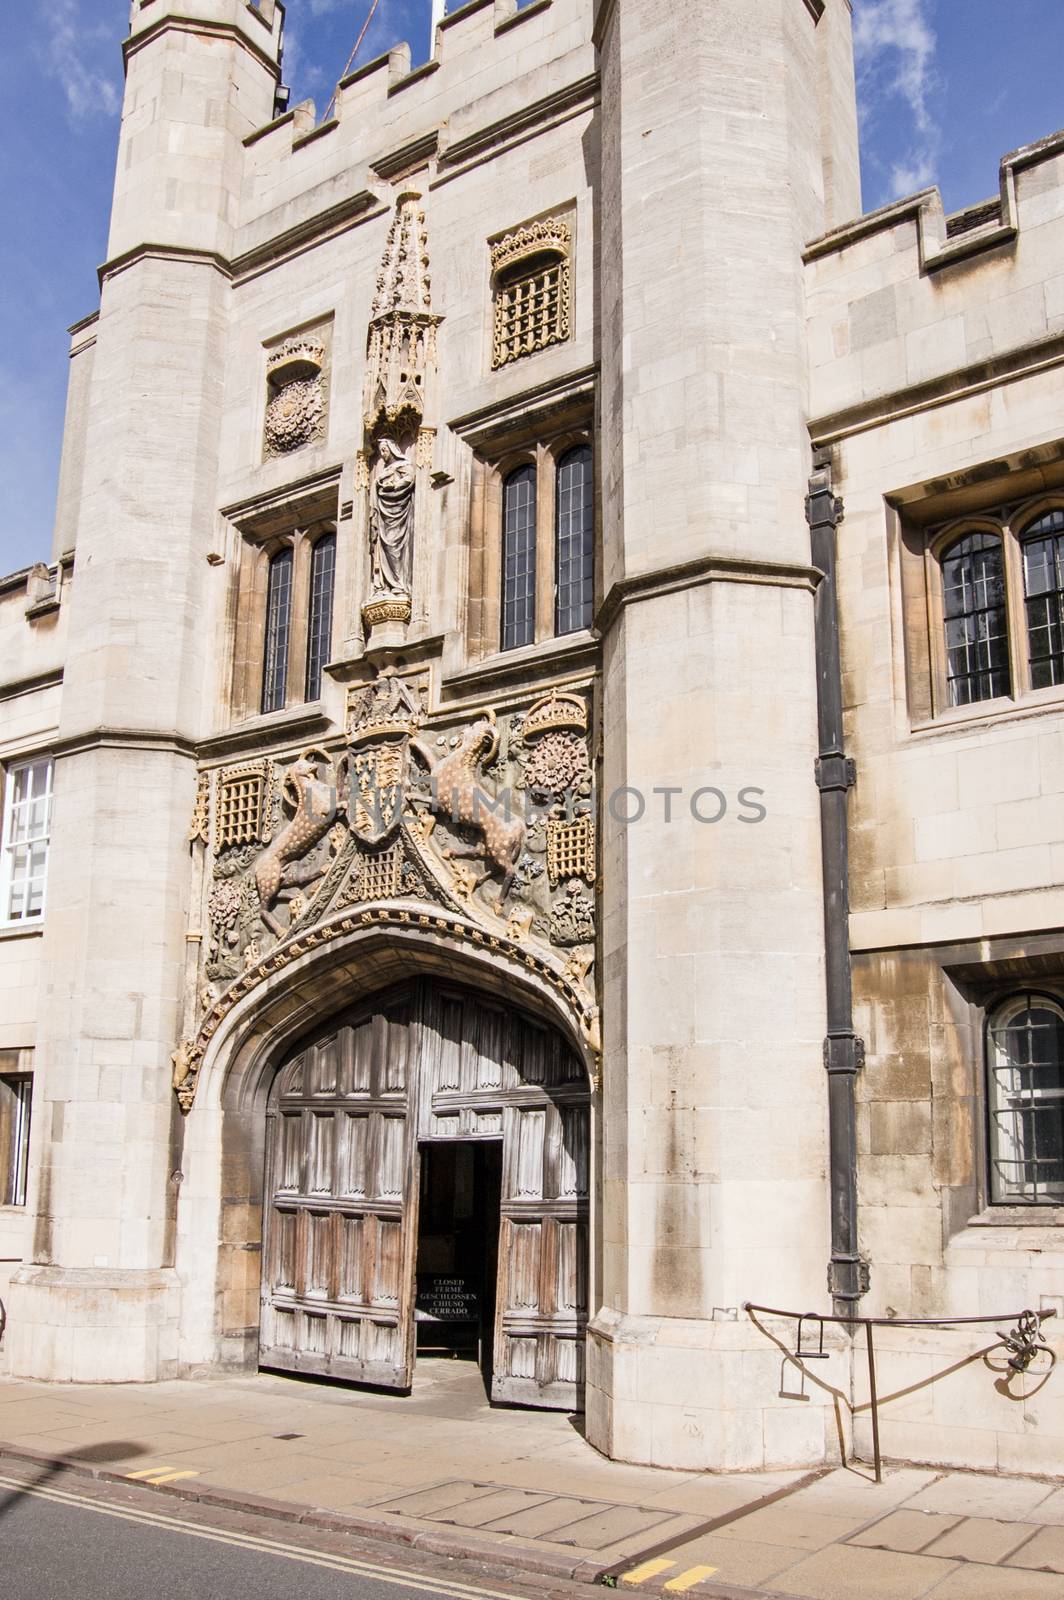 The impressive entrance to Christ's College, part of Cambridge University. Dating back to the fifteenth century, the college was founded by Lady Margaret Beaufort, mother of King Henry VIII.